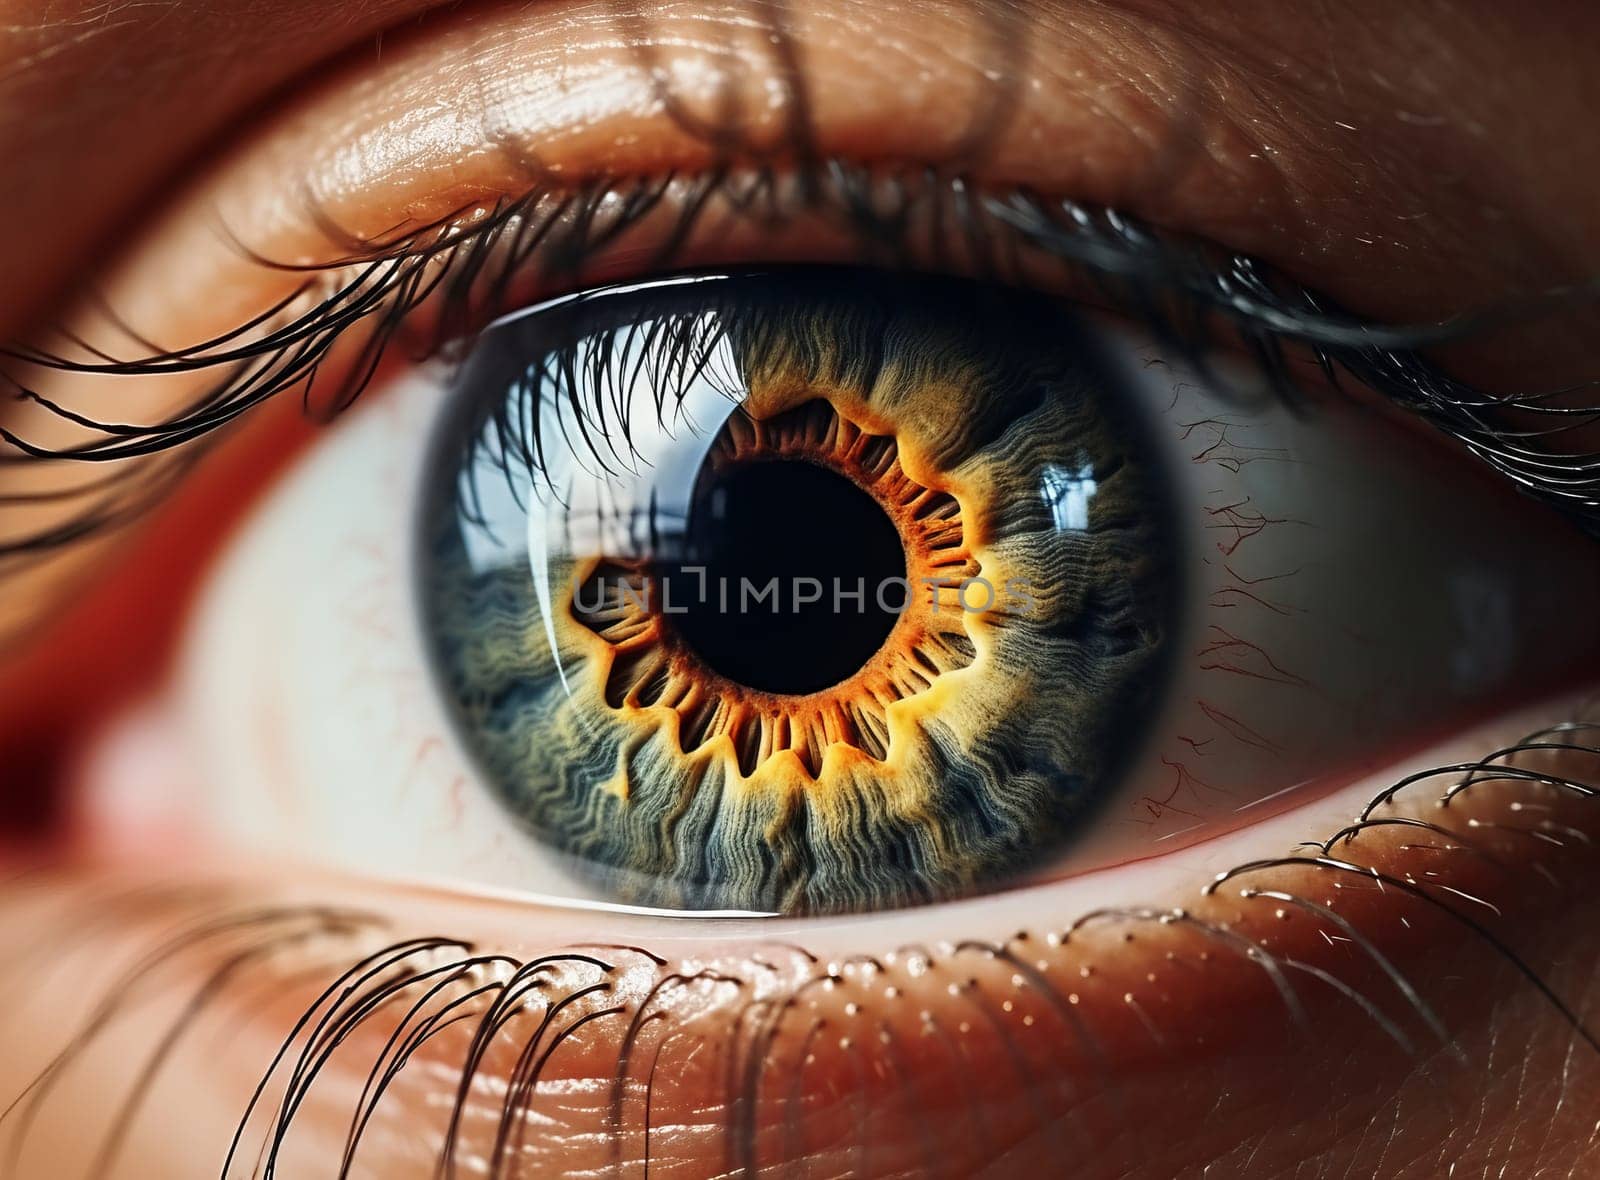 Beautiful human eye looking. Gray eye texture - macro view of pupil retina. Extreme close-up detail of eyeball with amazing reflections. Concept of good vision and problems with eyes. by sfinks